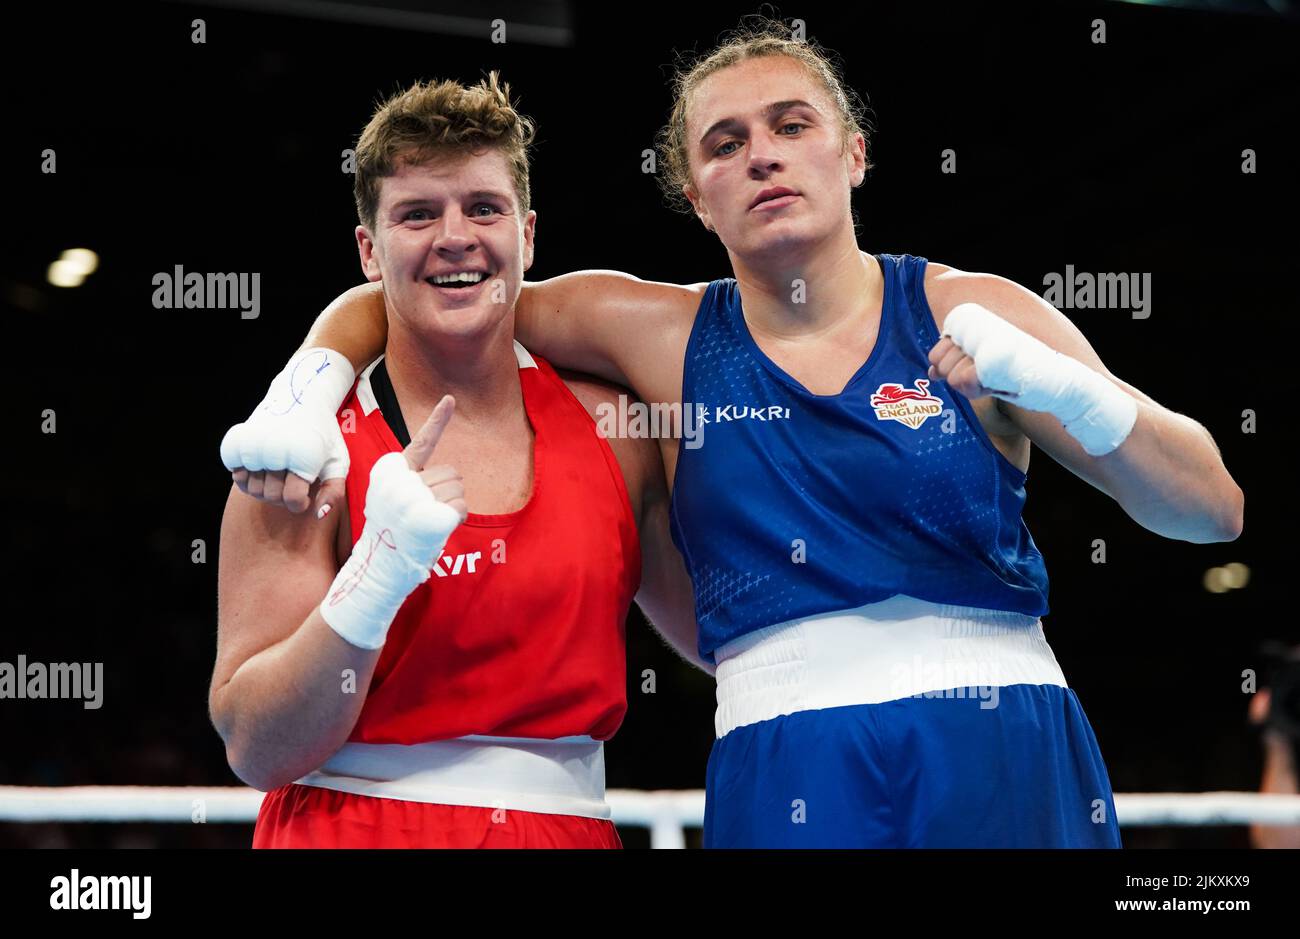 Northern Ireland's Eireann Cathlin Nugent (right) and England's Jodie Charlotte Wilkinson during the Women’s Over 66kg-70kg (Light Middle) - Quarter-Final 3 at The NEC on day six of the 2022 Commonwealth Games in Birmingham. Picture date: Wednesday August 3, 2022. Stock Photo